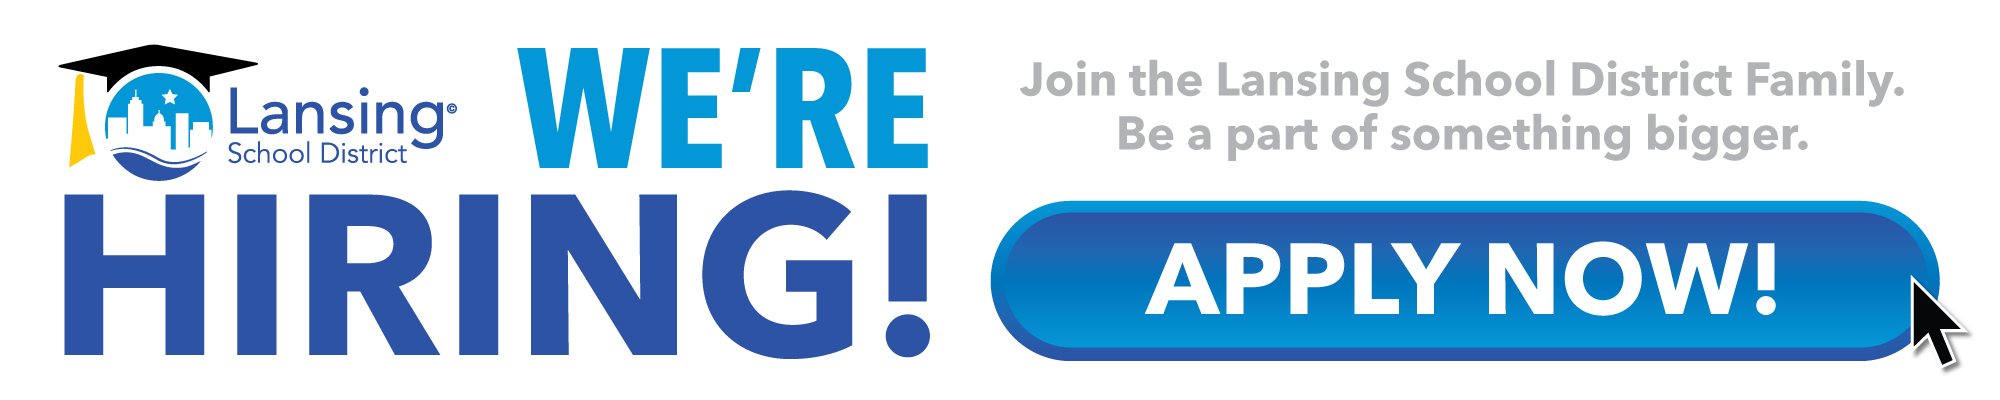 We're Hiring! Join the Lansing School District Family. Be a part of something bigger.